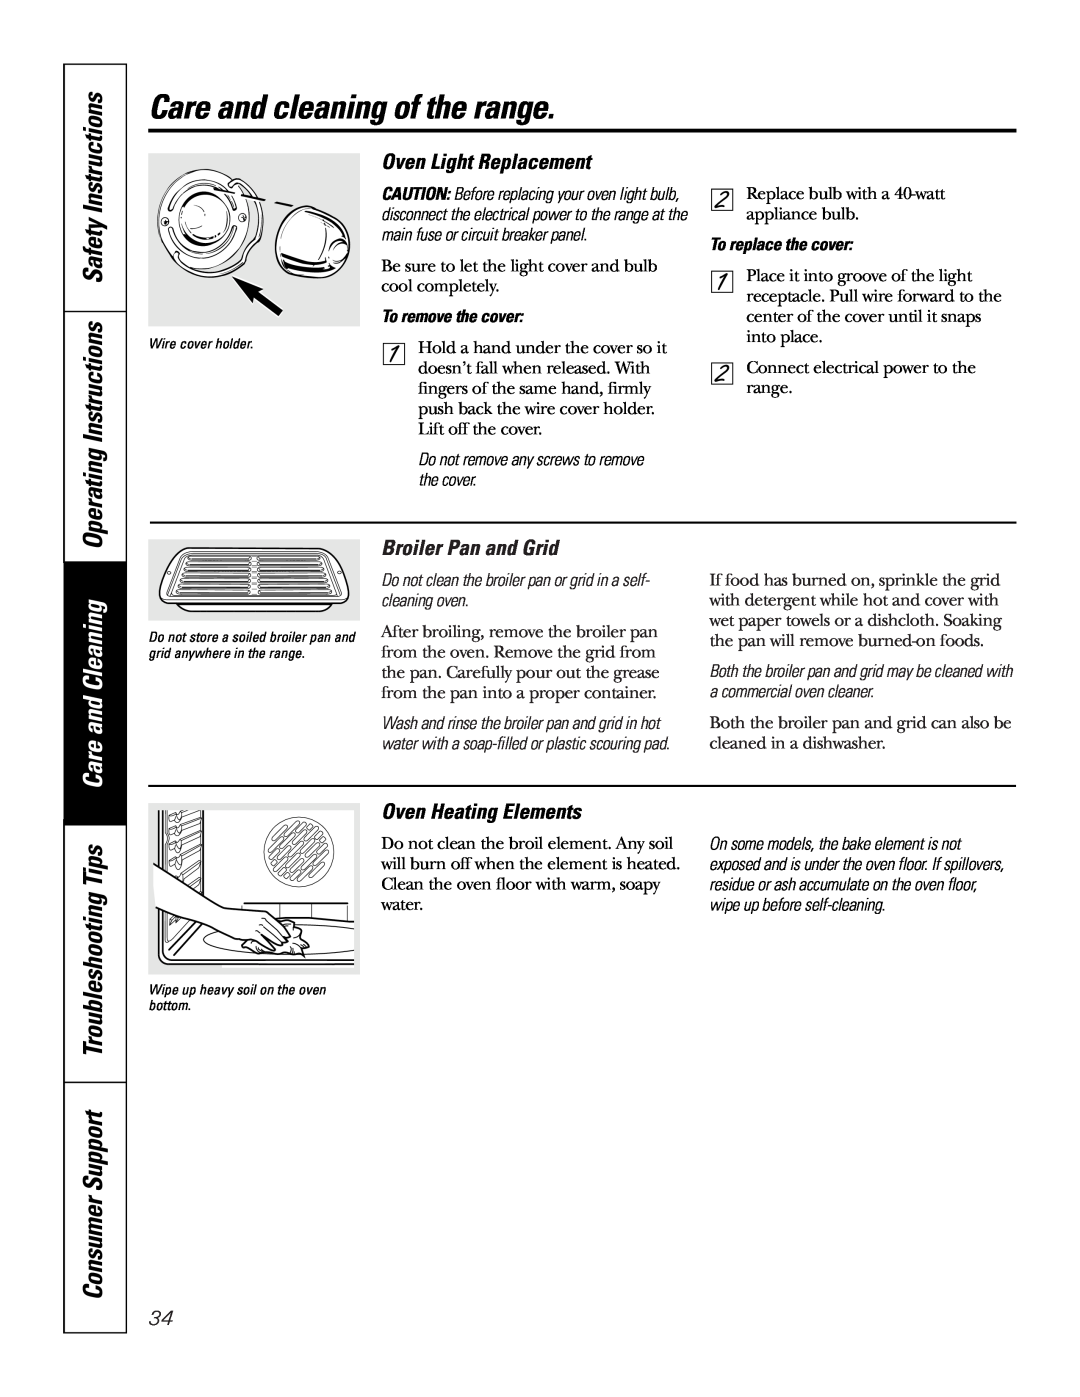 GE JB910 Operating Instructions Safety, Care and Cleaning, Consumer Support Troubleshooting Tips, Oven Light Replacement 